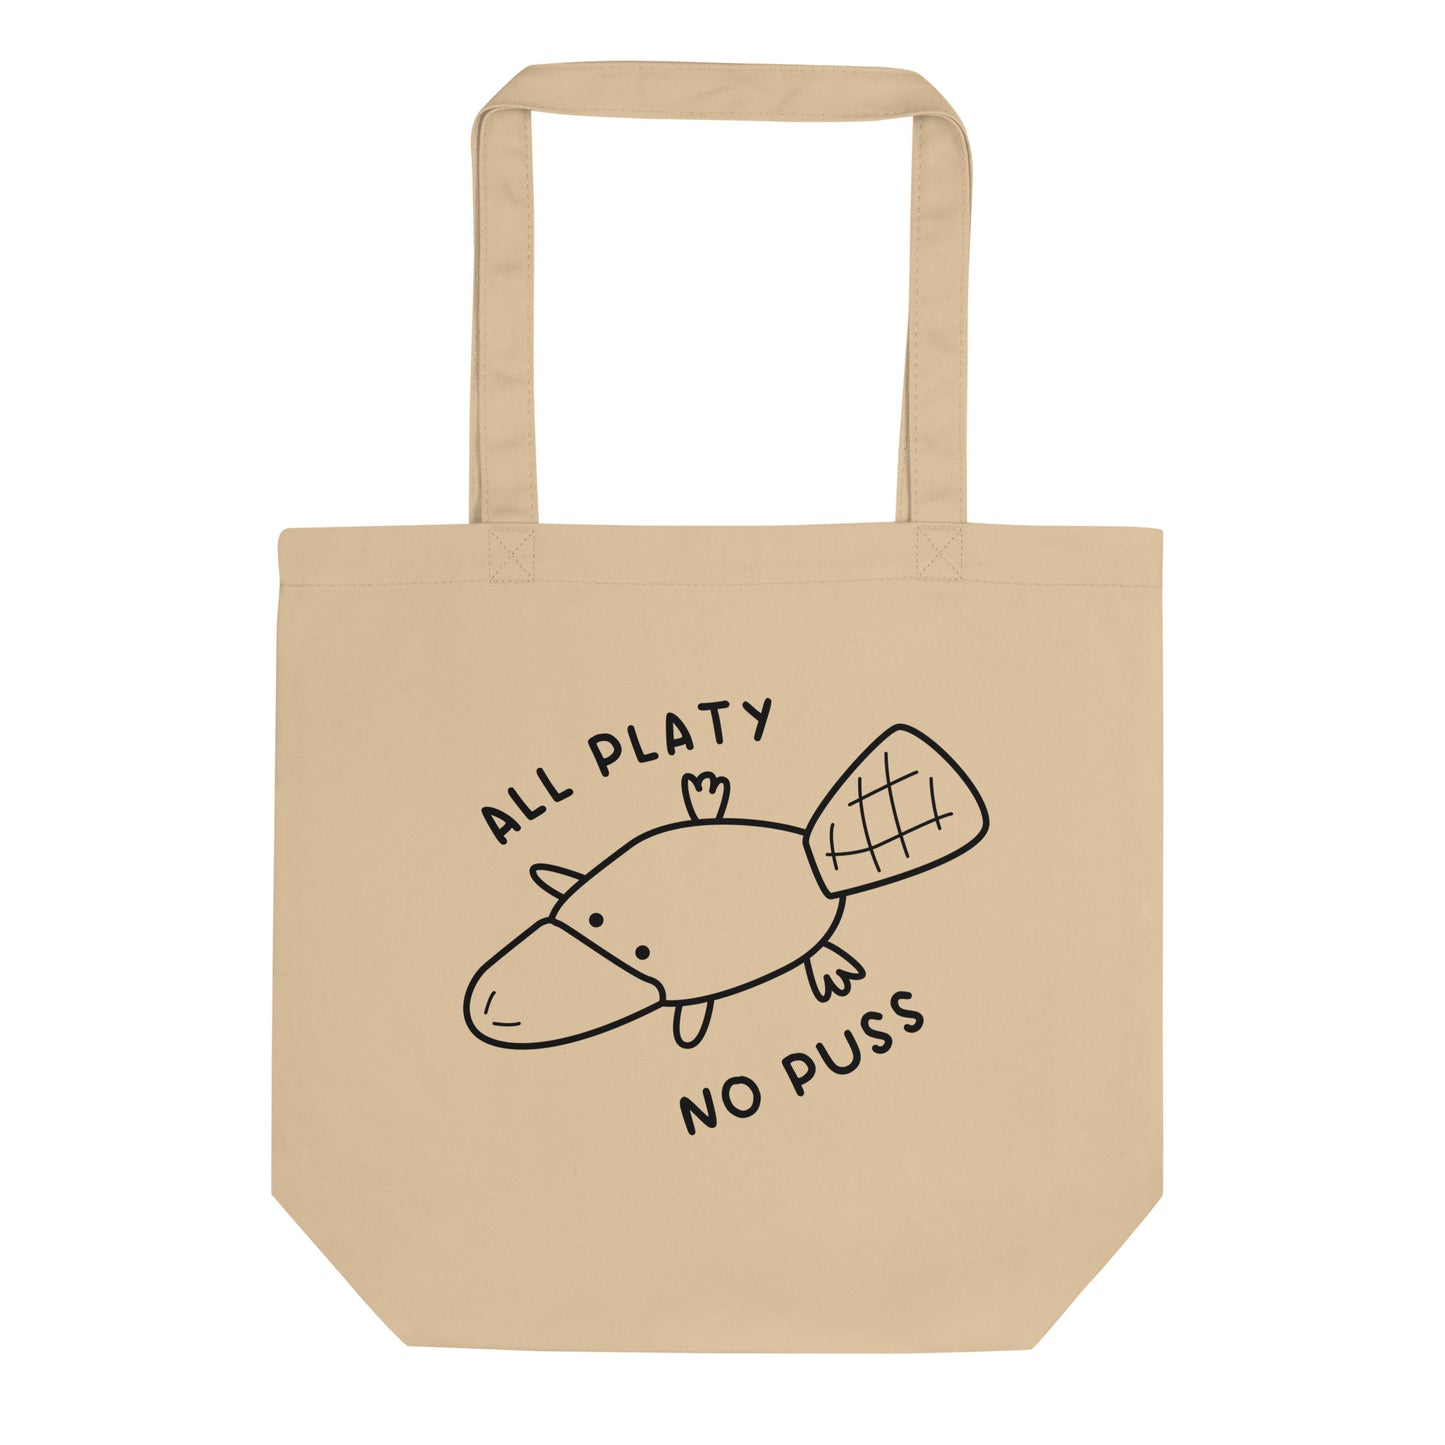 All Platy, No Puss Tote Bag